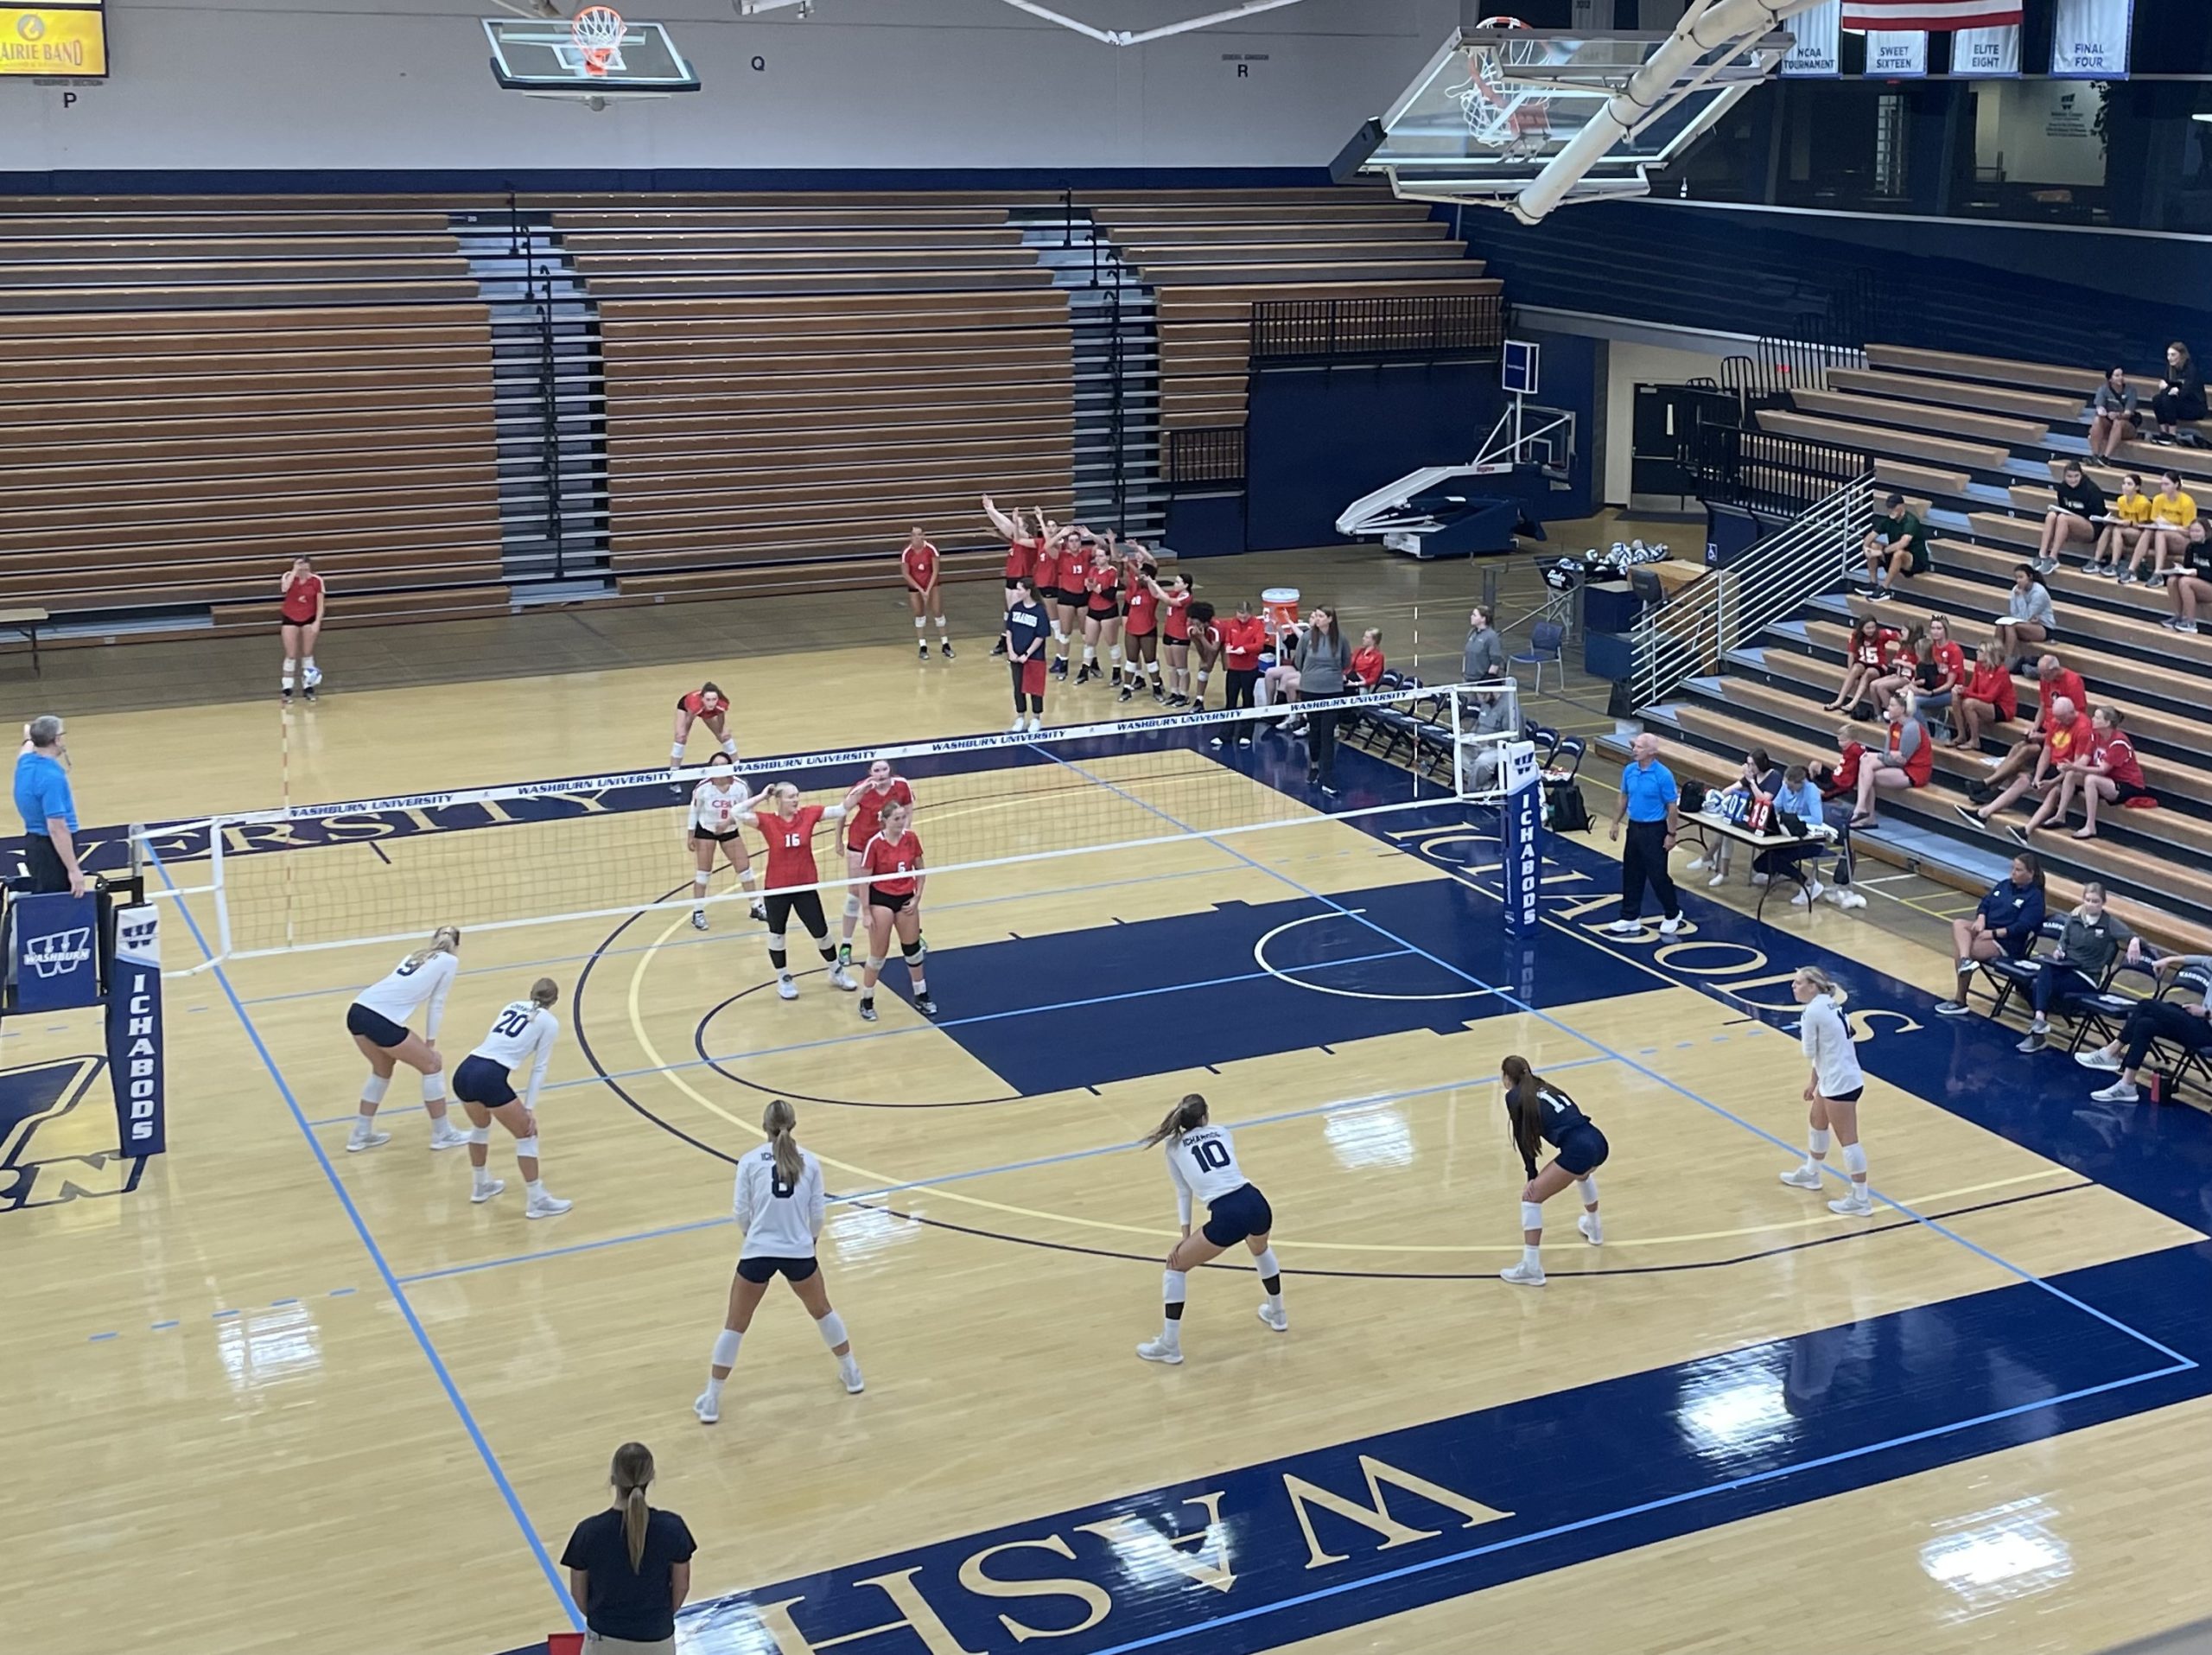 The Lady Ichabods begin their first set against the Christian brothers in Wednesday’s game. They won 3 out of the 5 sets.